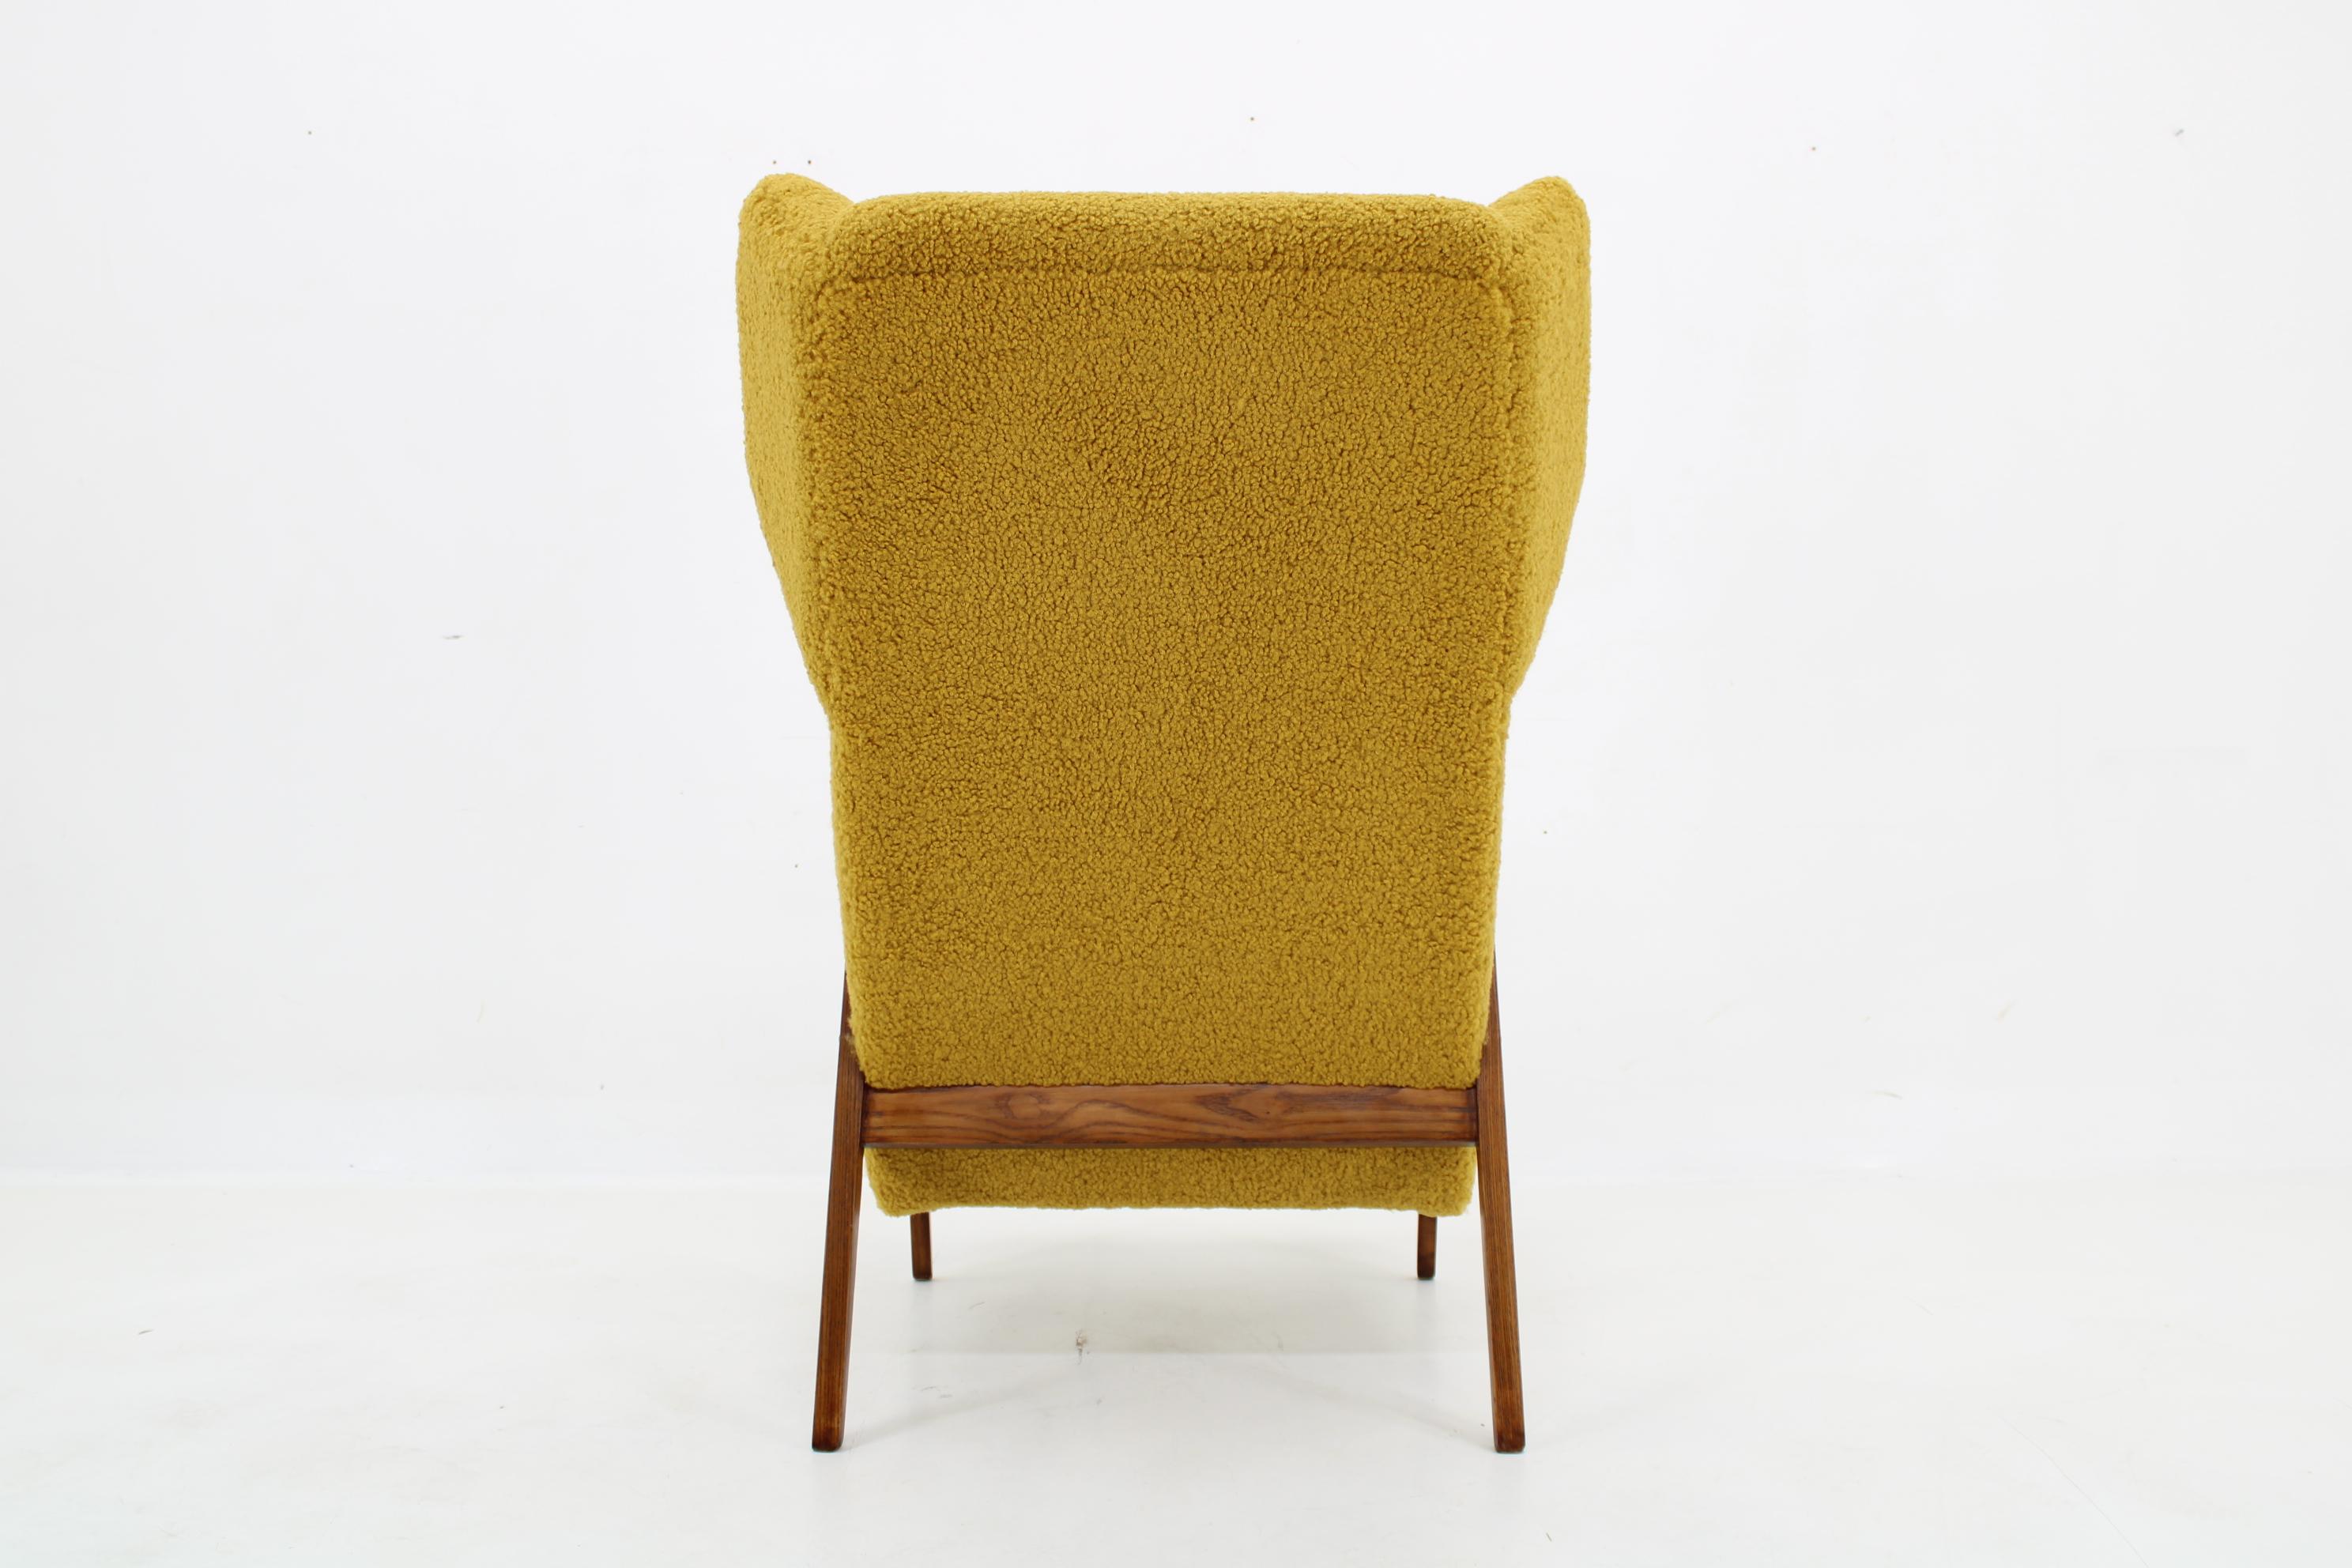 1960s Beech Wing Chair in Sheep Skin Fabric, Restored For Sale 2